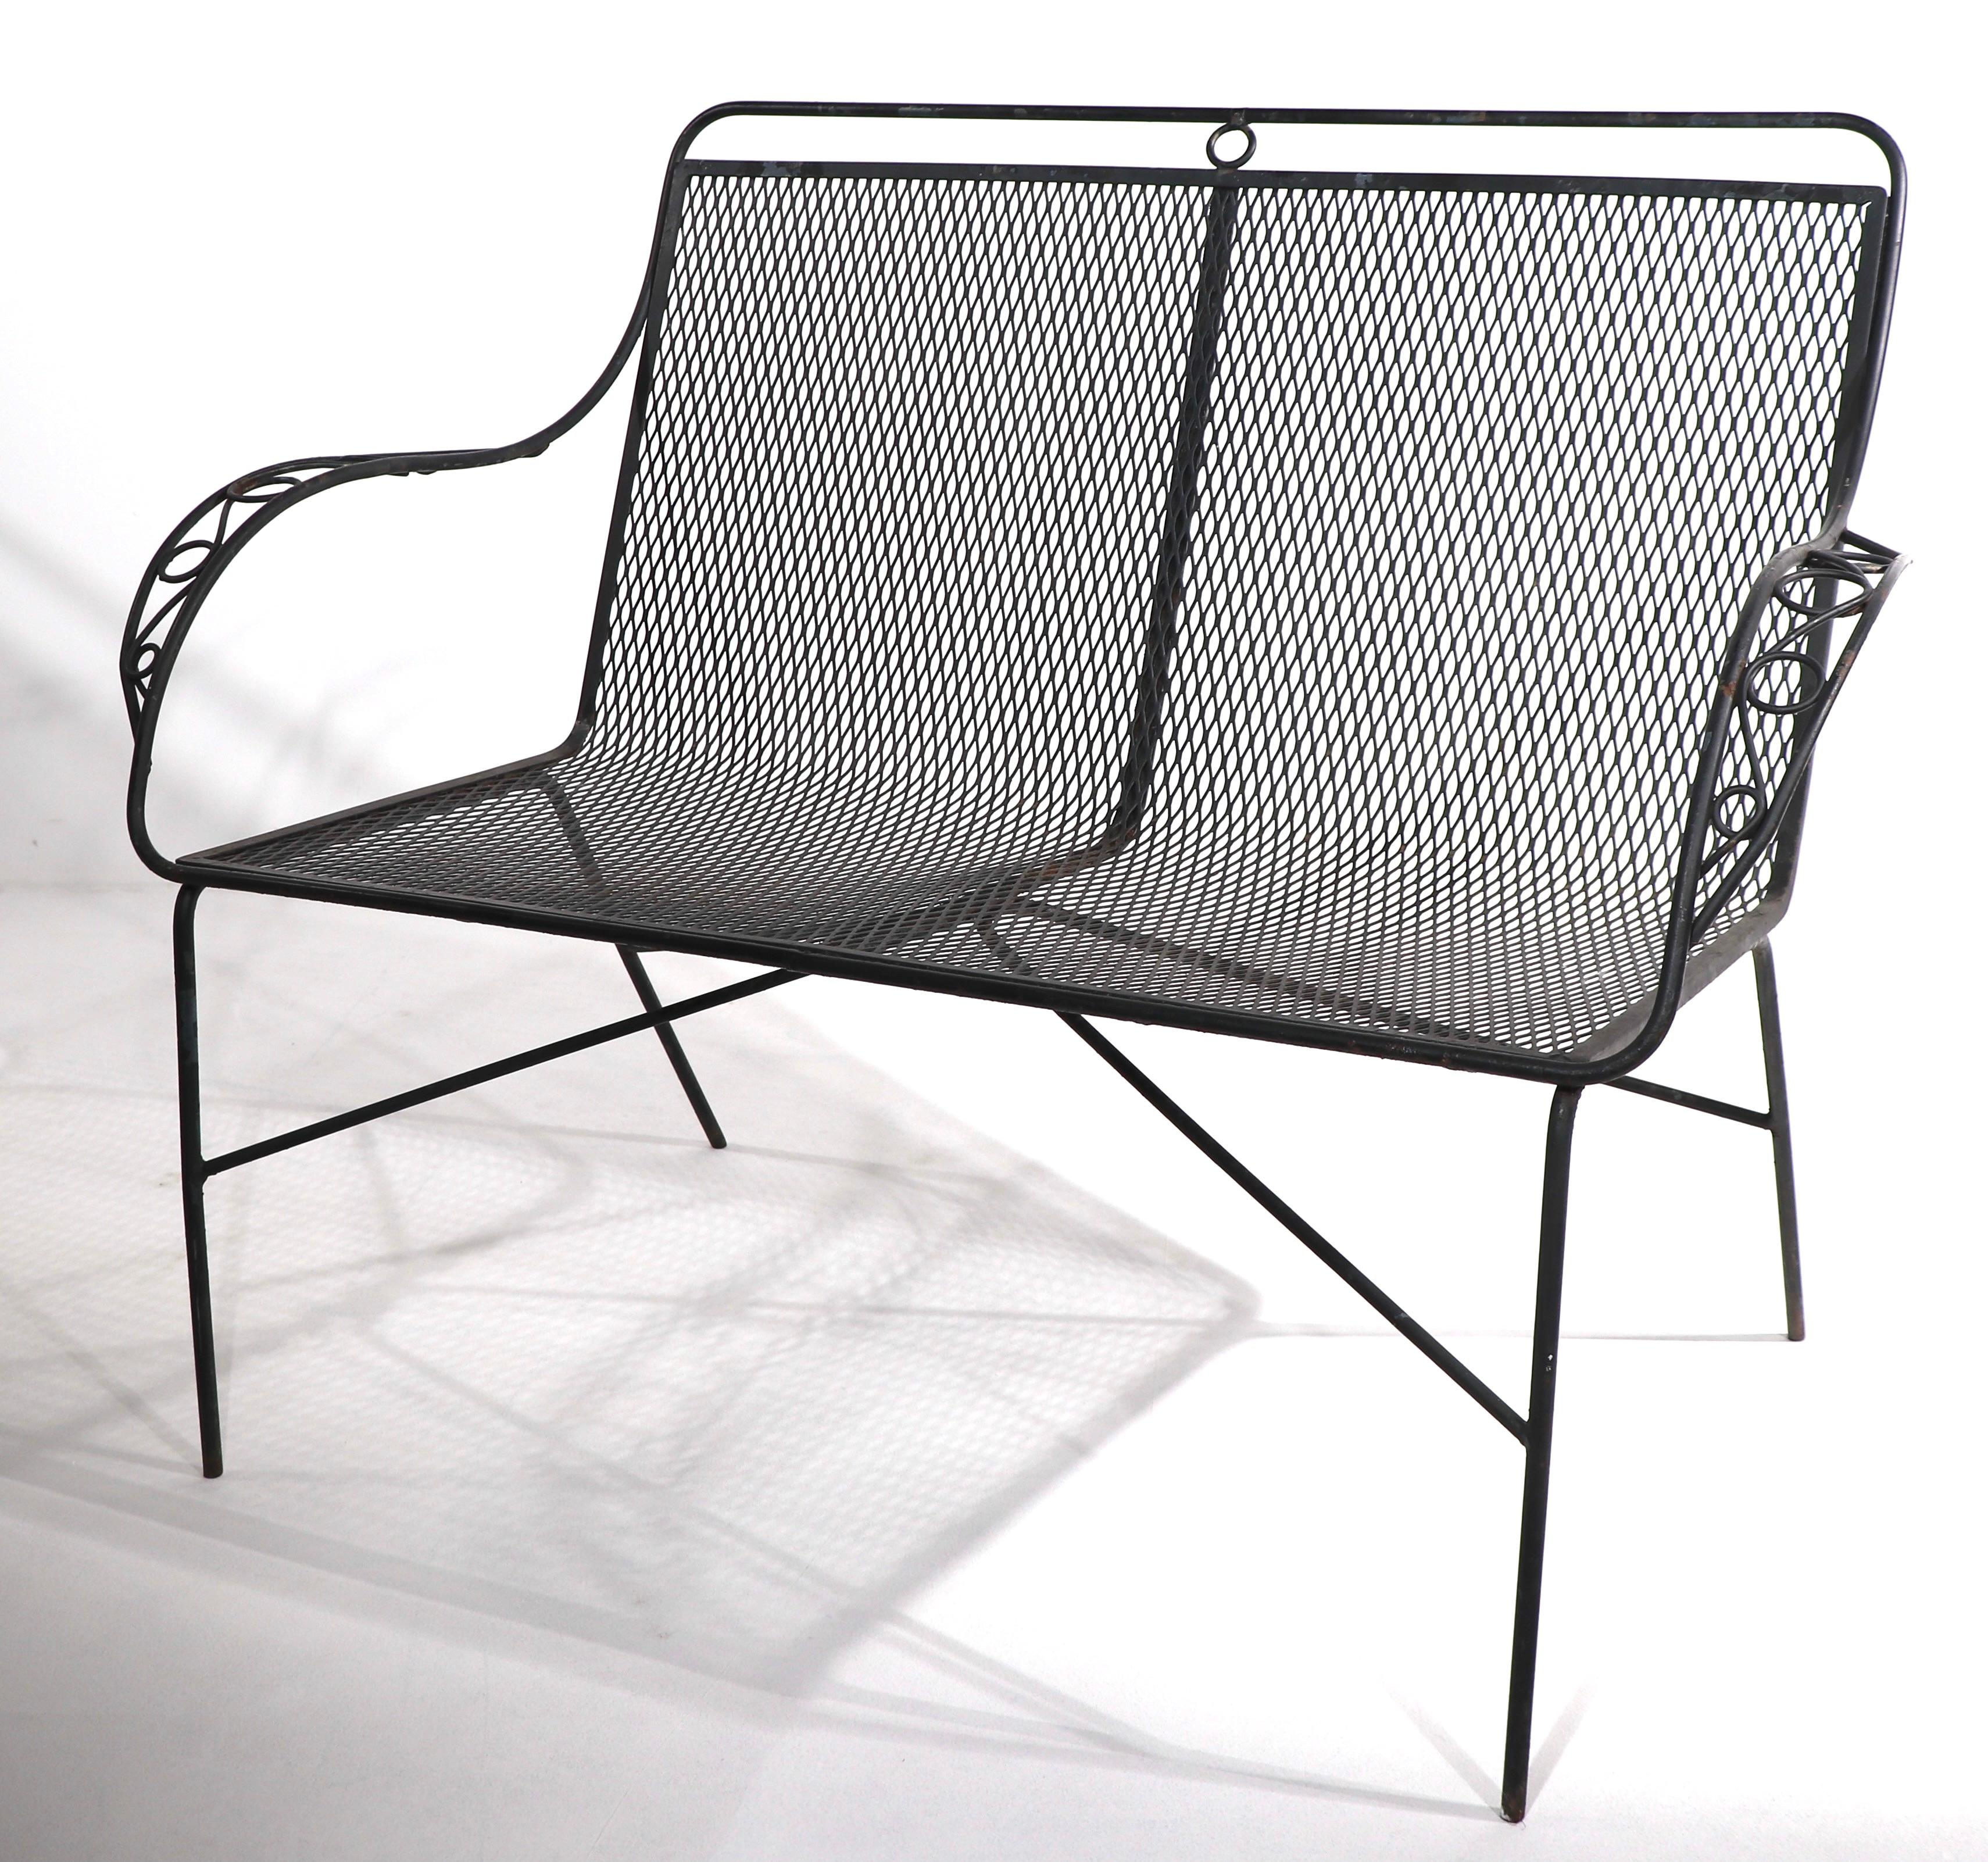 Stylish wrought iron and metal mesh loveseat settee, attributed to Woodard. This example is in very good condition, showing only light cosmetic wear, normal and consistent with age. 
Perfect for garden, patio, or poolside use, currently in later